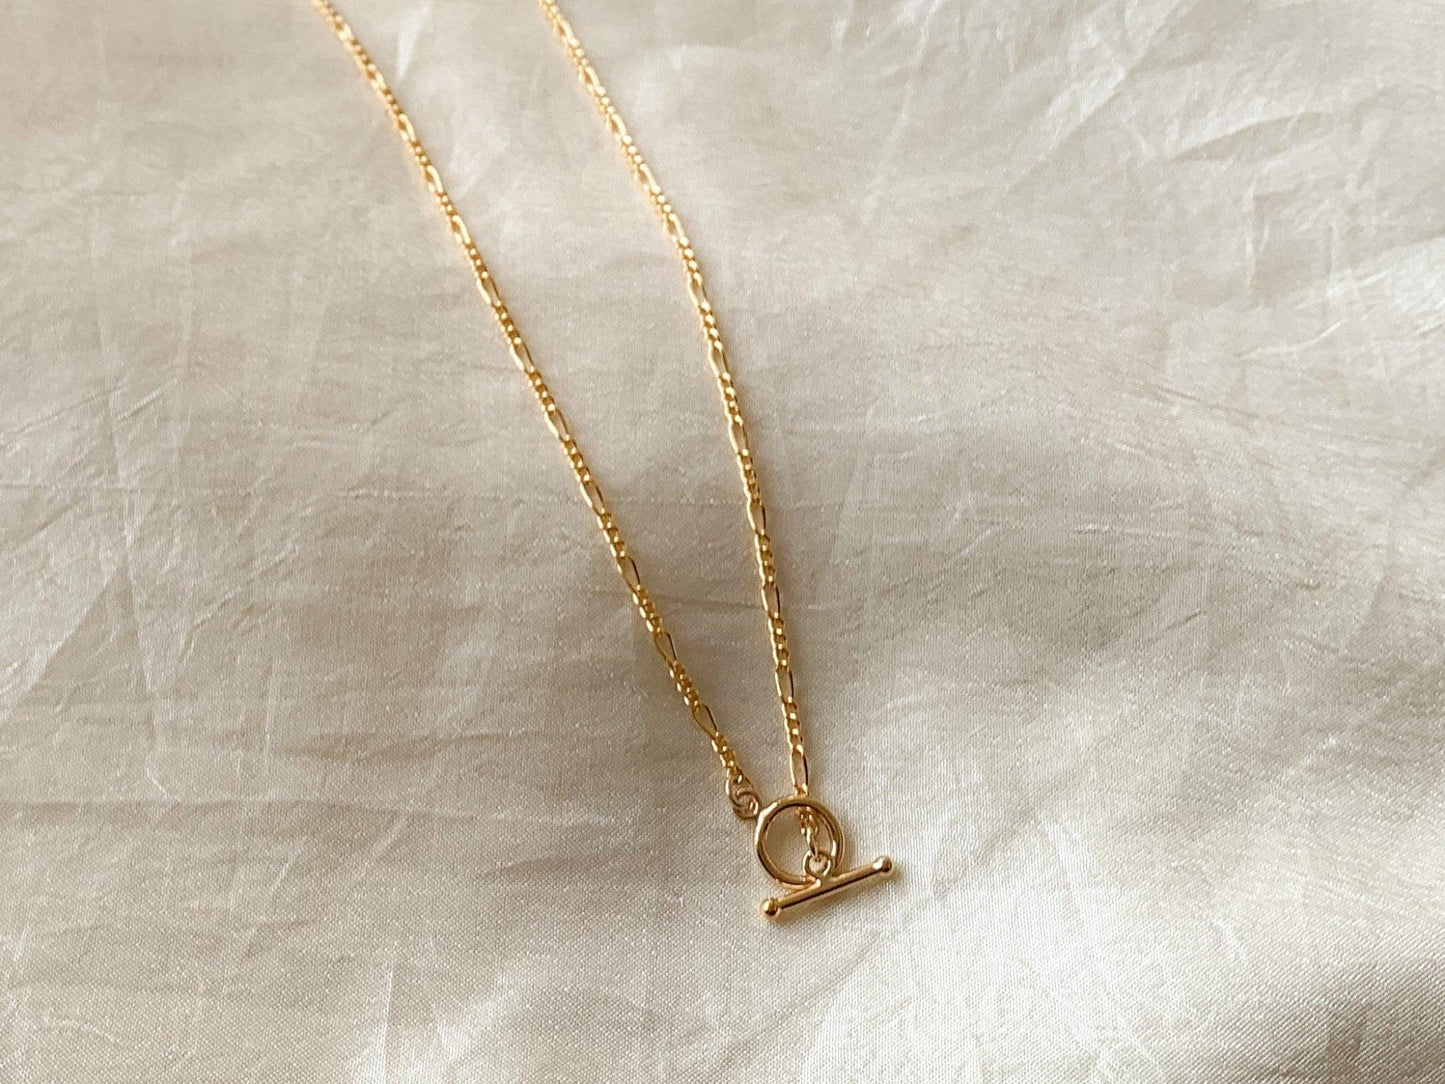 Dea dia / Dainty, lightweight 14k gold fill Figaro chain with toggle clasp closure. Wear it alone for a simple statement or layer it up for higher impact. Clasp can be worn in the front or back. 16.75" length - Designed and handmade in Los Angeles.